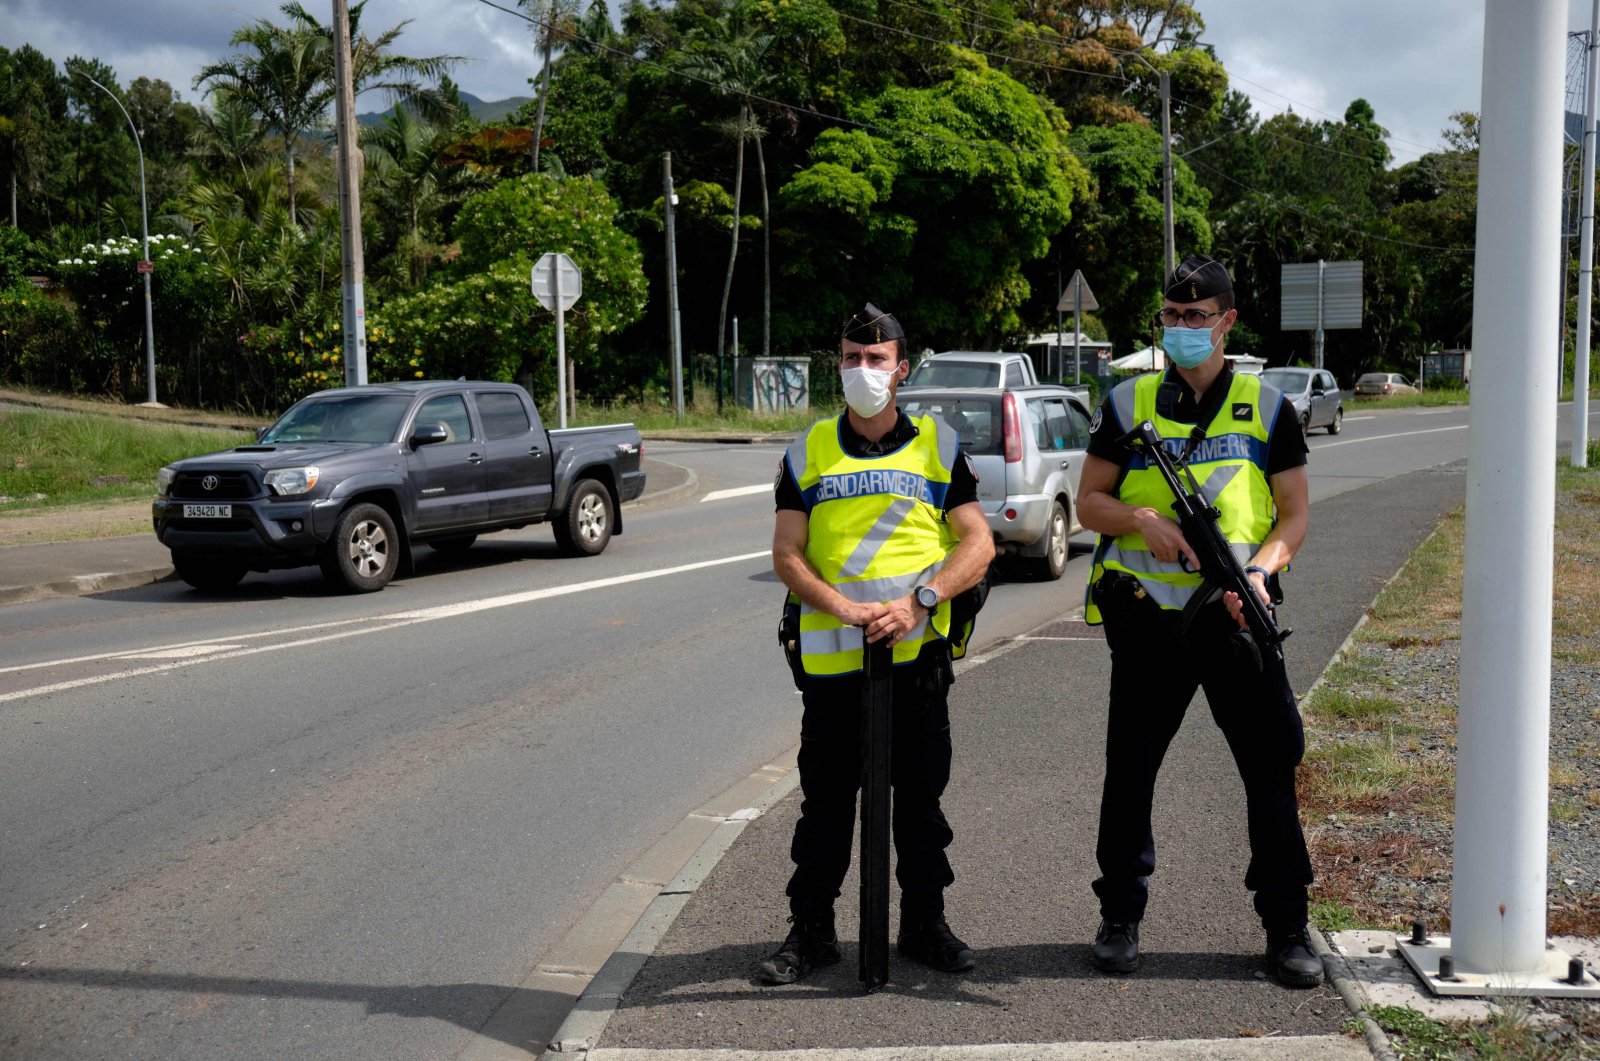 Gendarmerie forces with automatic rifles on the road of Saint Michel, on referendum day, in Mont Dore, New Caledonia, Dec. 12, 2021. (AFP Photo)